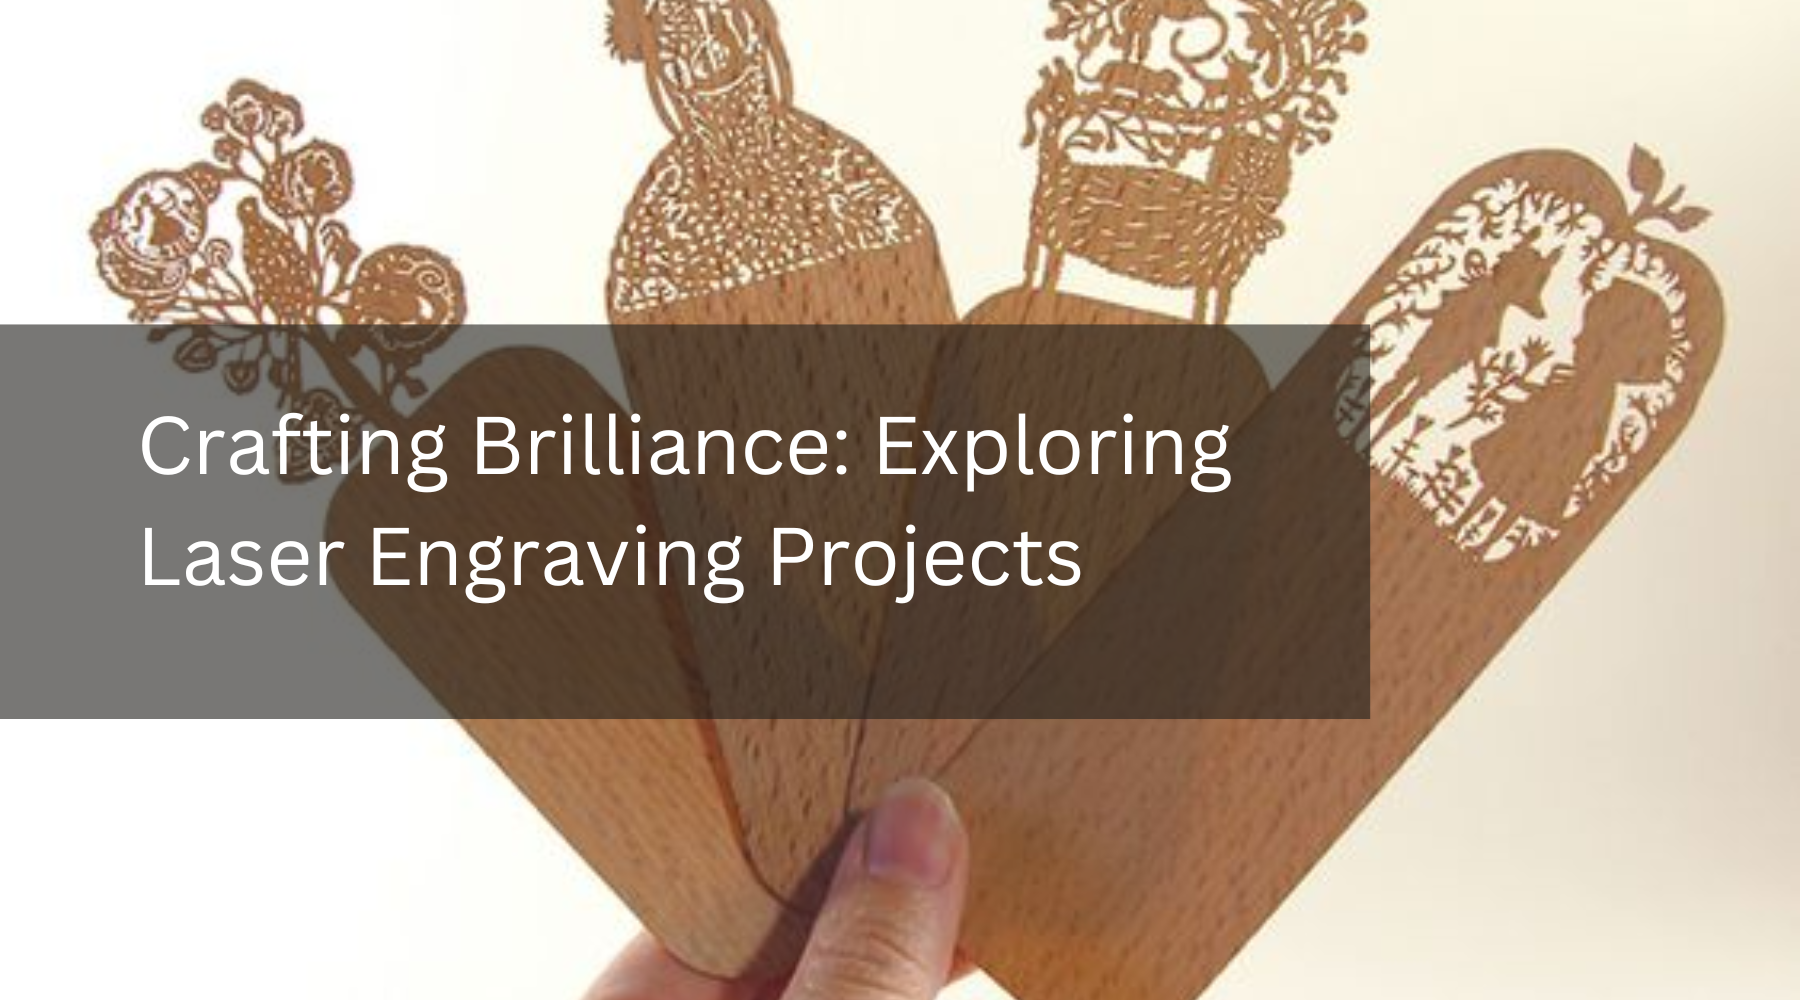 Crafting Brilliance: Exploring Laser Engraving Projects and Ideas for Craft Enthusiasts